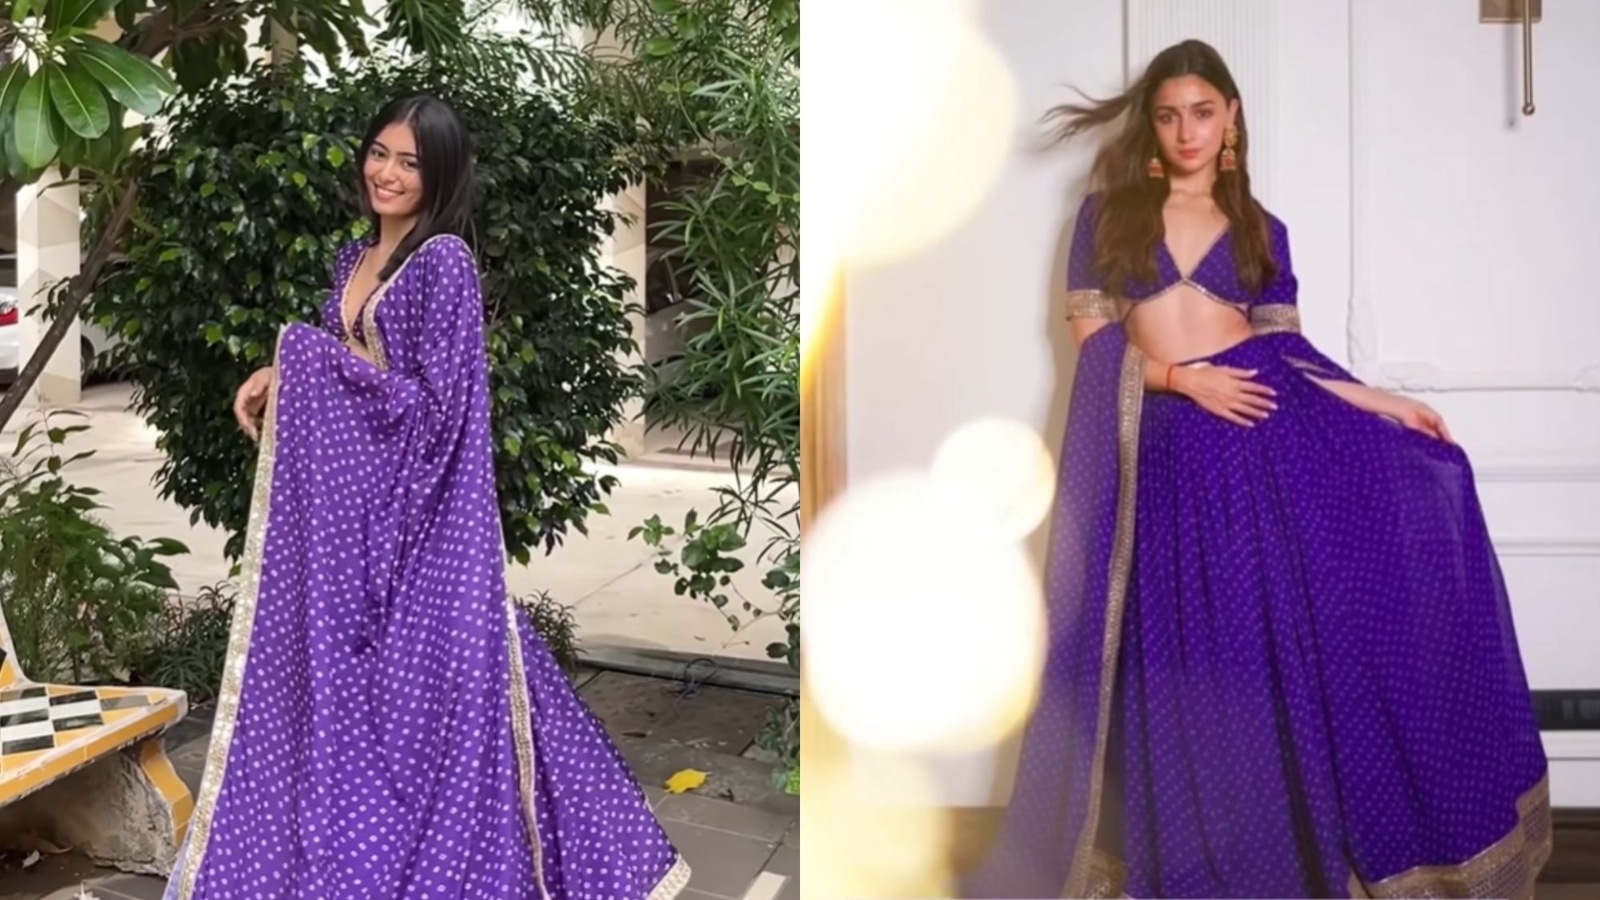 From florals to pastels, these lehenga looks by Alia Bhatt, Shraddha Kapoor  and other divas are inspiration for a summer wedding